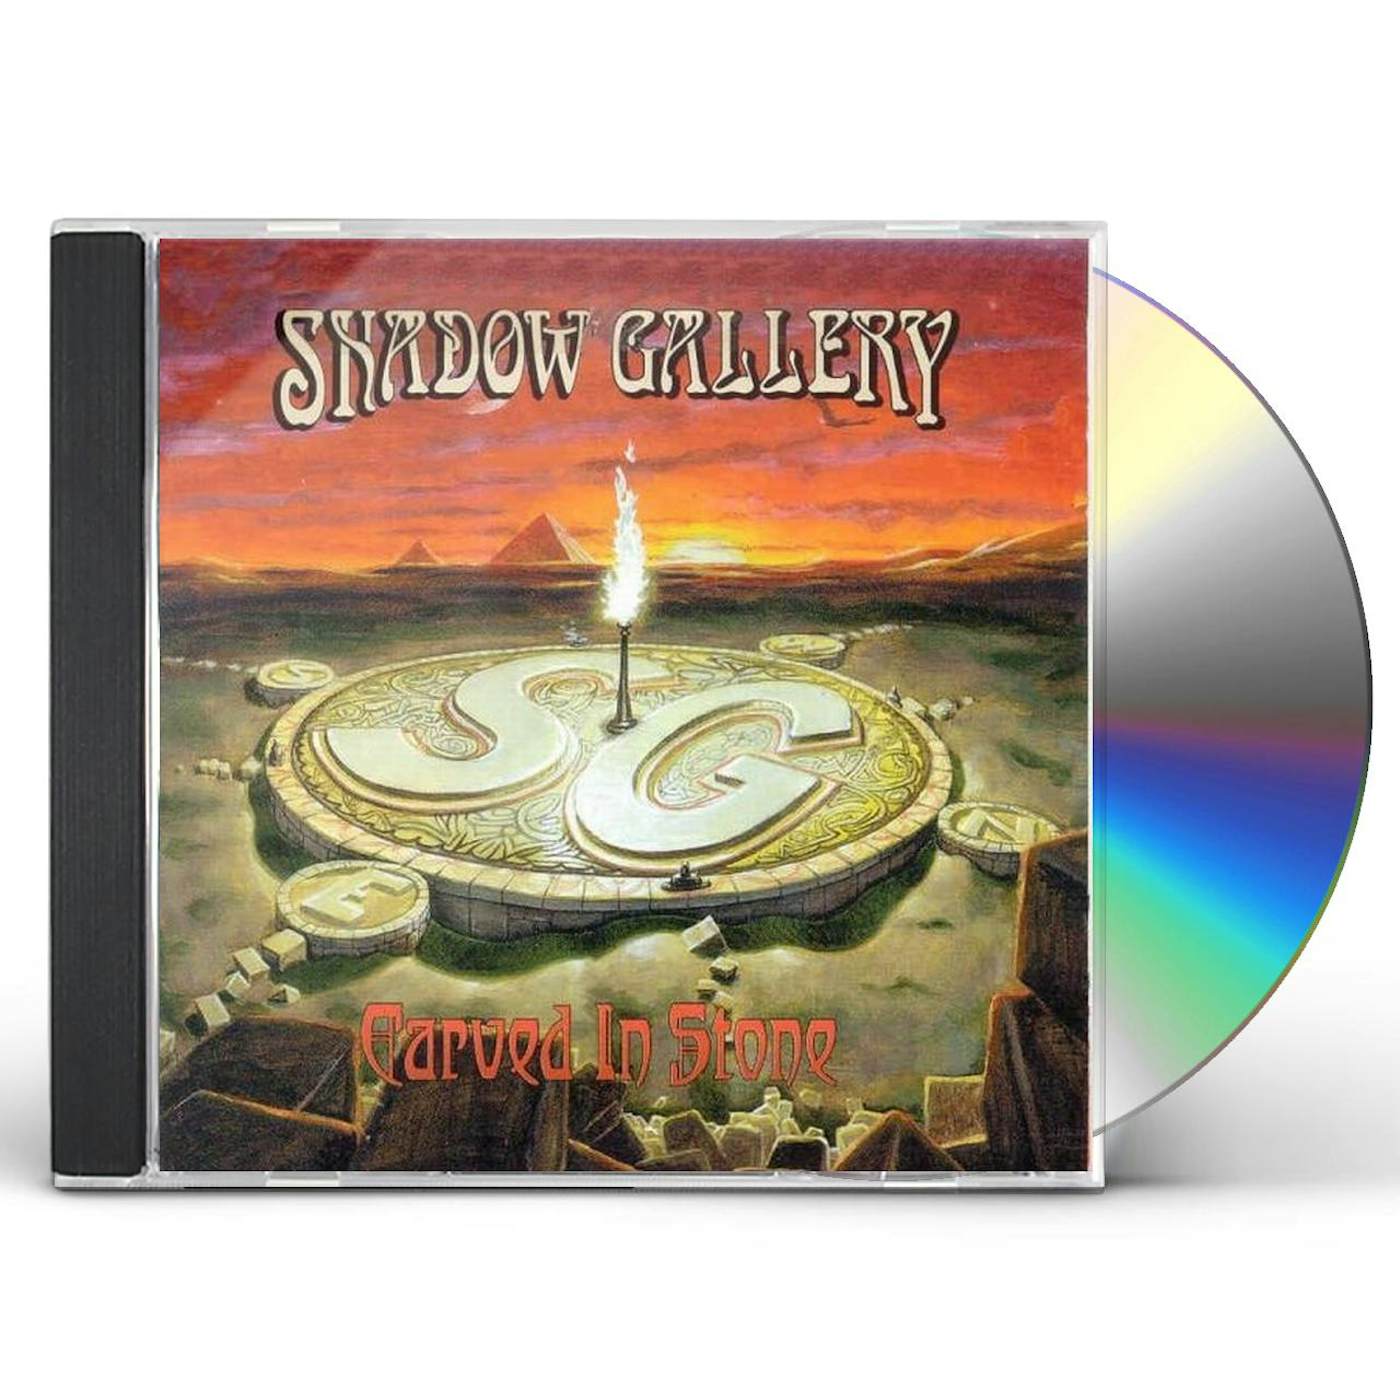 Shadow Gallery CARVED IN STONE CD